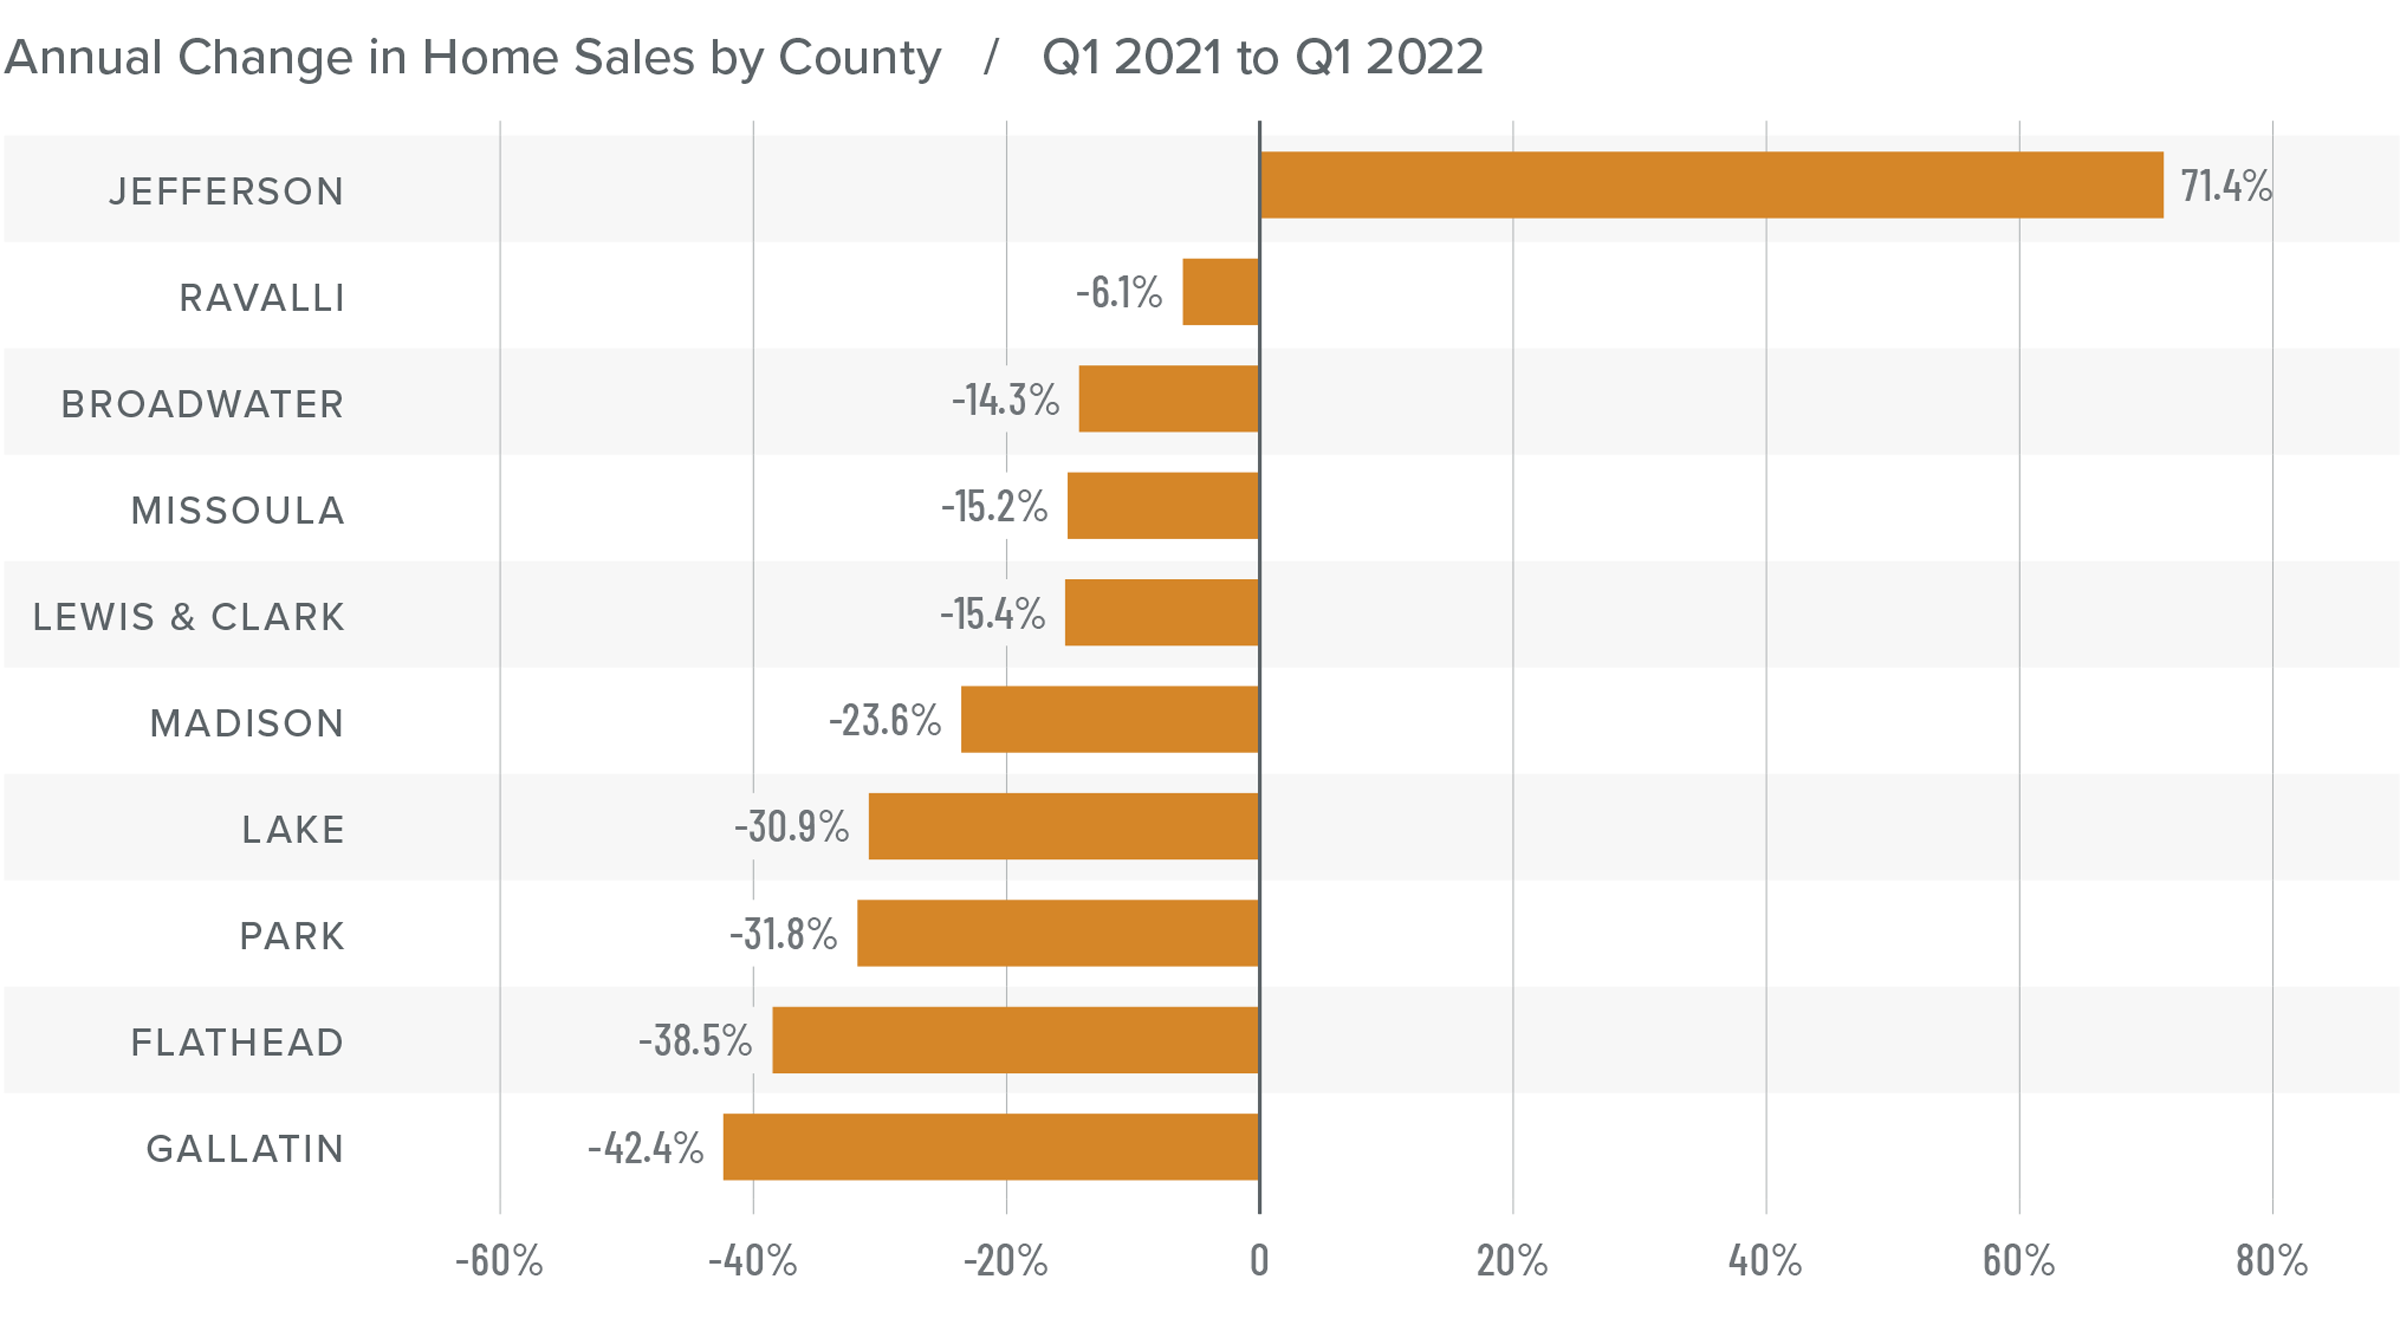 A bar graph showing the annual change in home sales for various counties in Montana between Q1 2021 and Q1 2022.